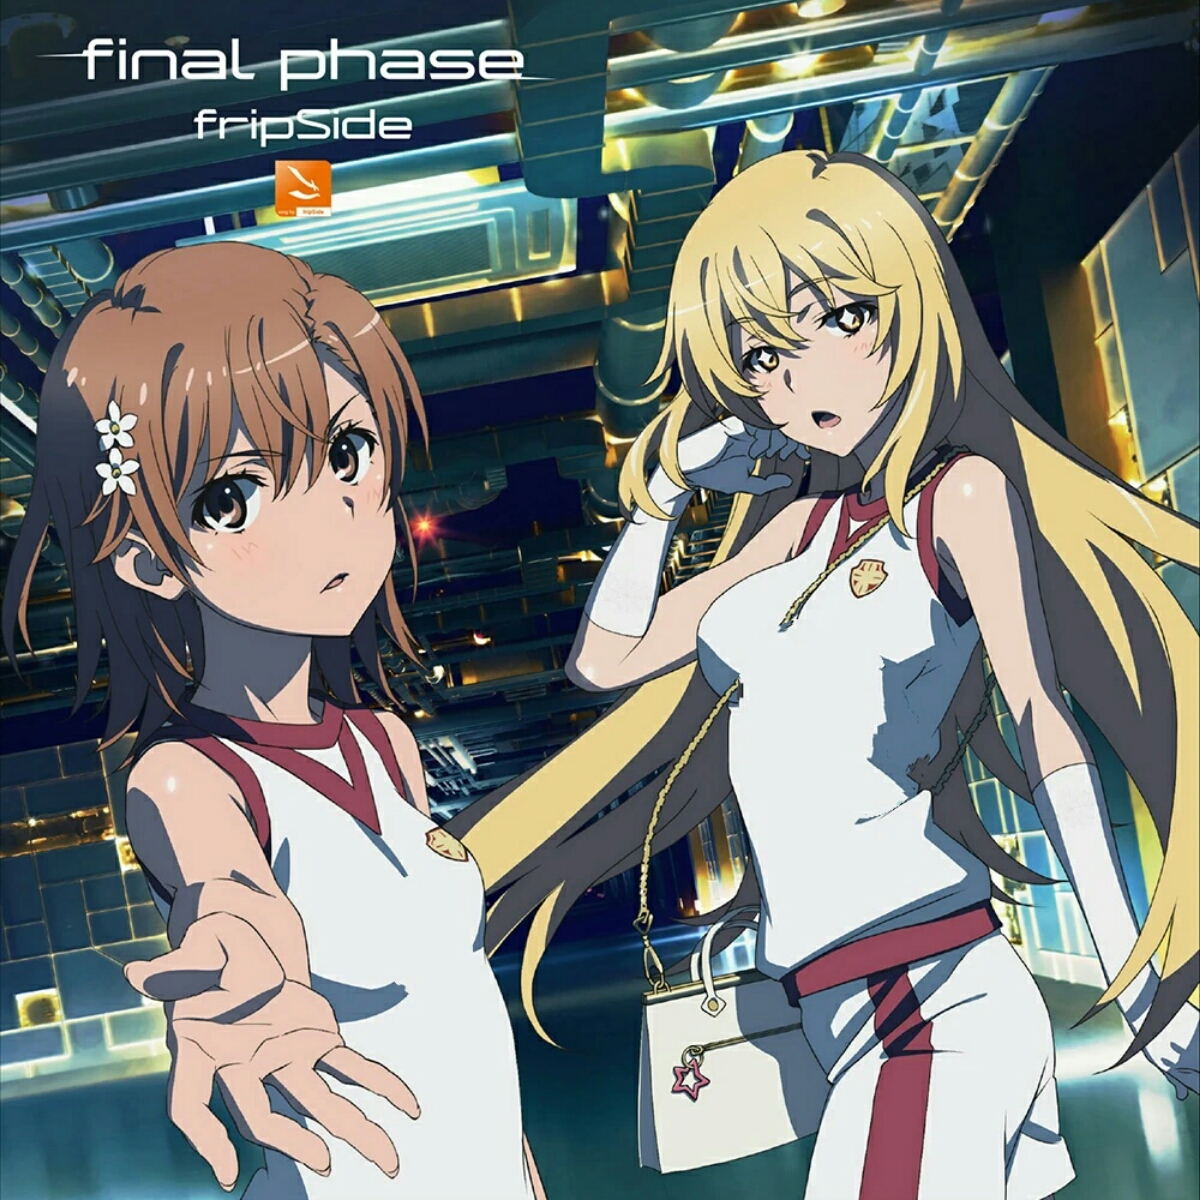 FripSide - Final Phase